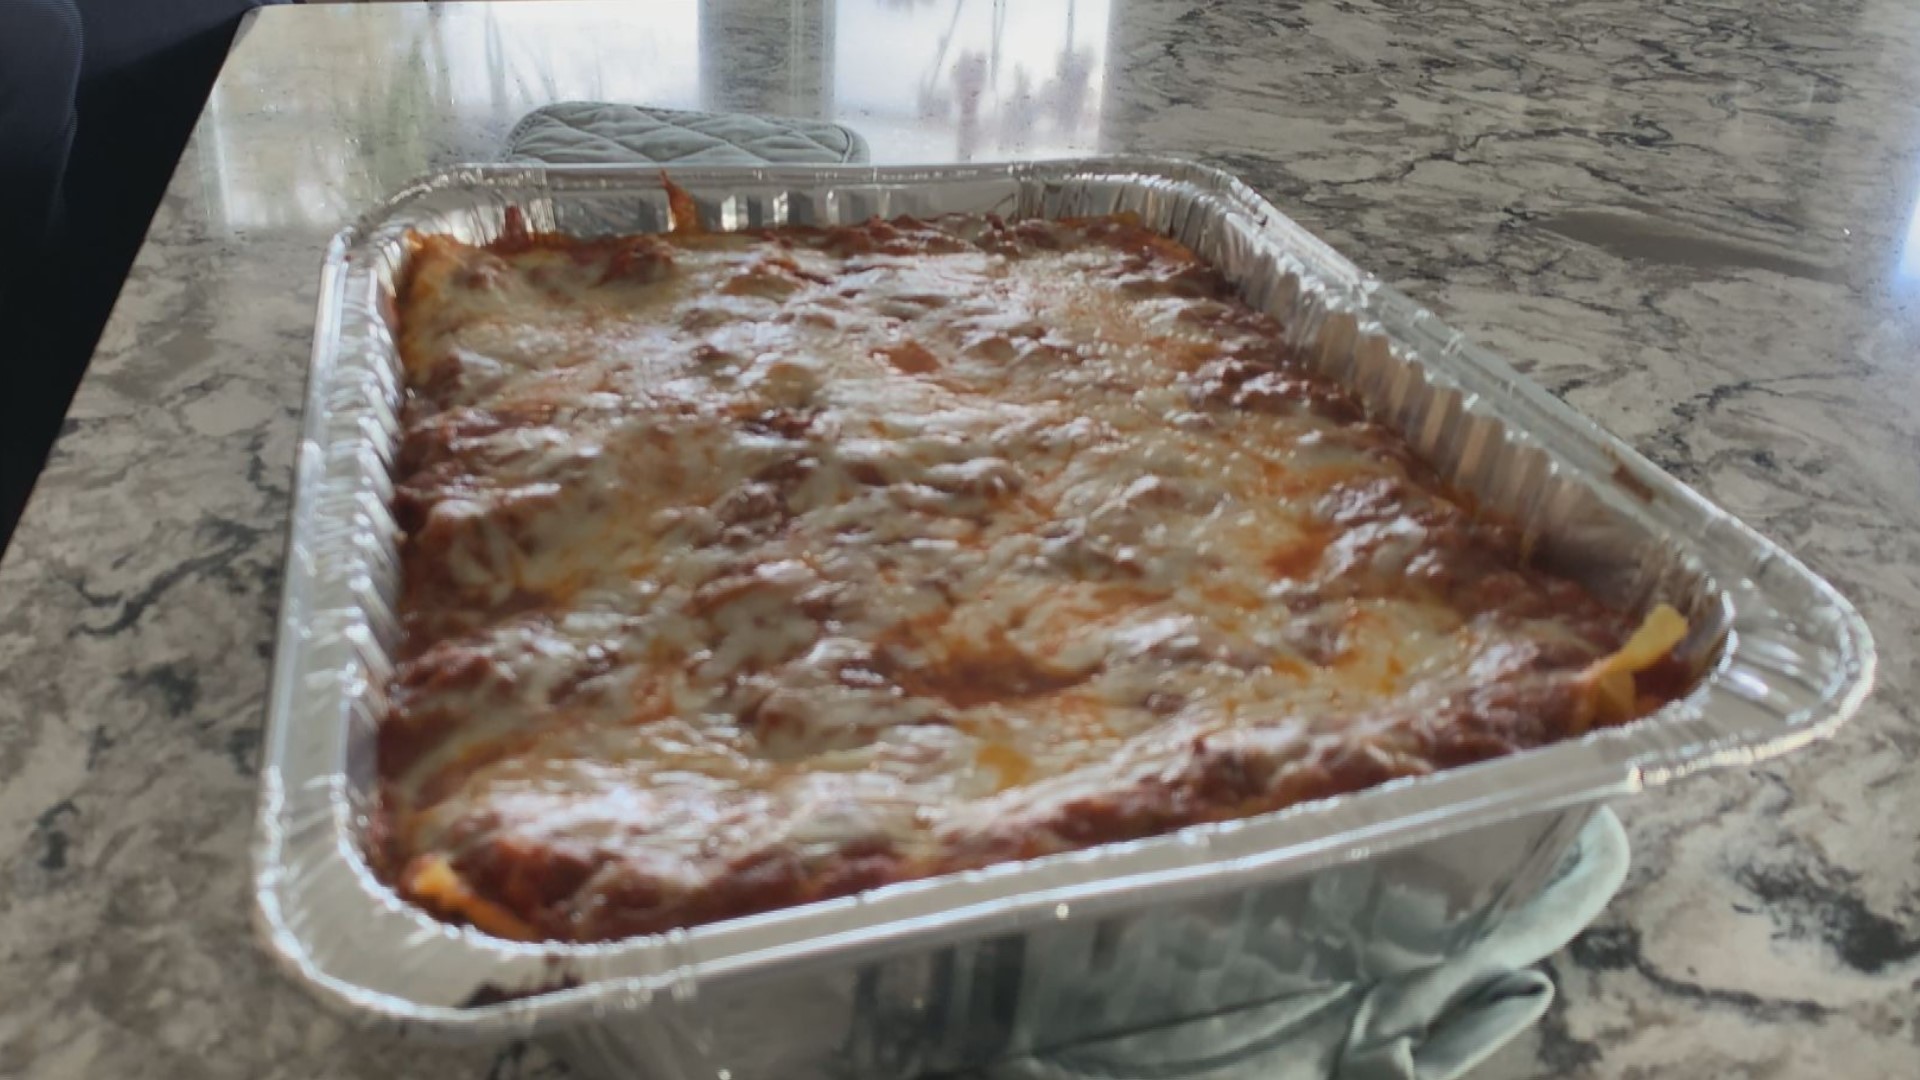 Volunteers in Maine make lasagna dinners for people who ask through the pandemic-born non-profit Lasagna Love.